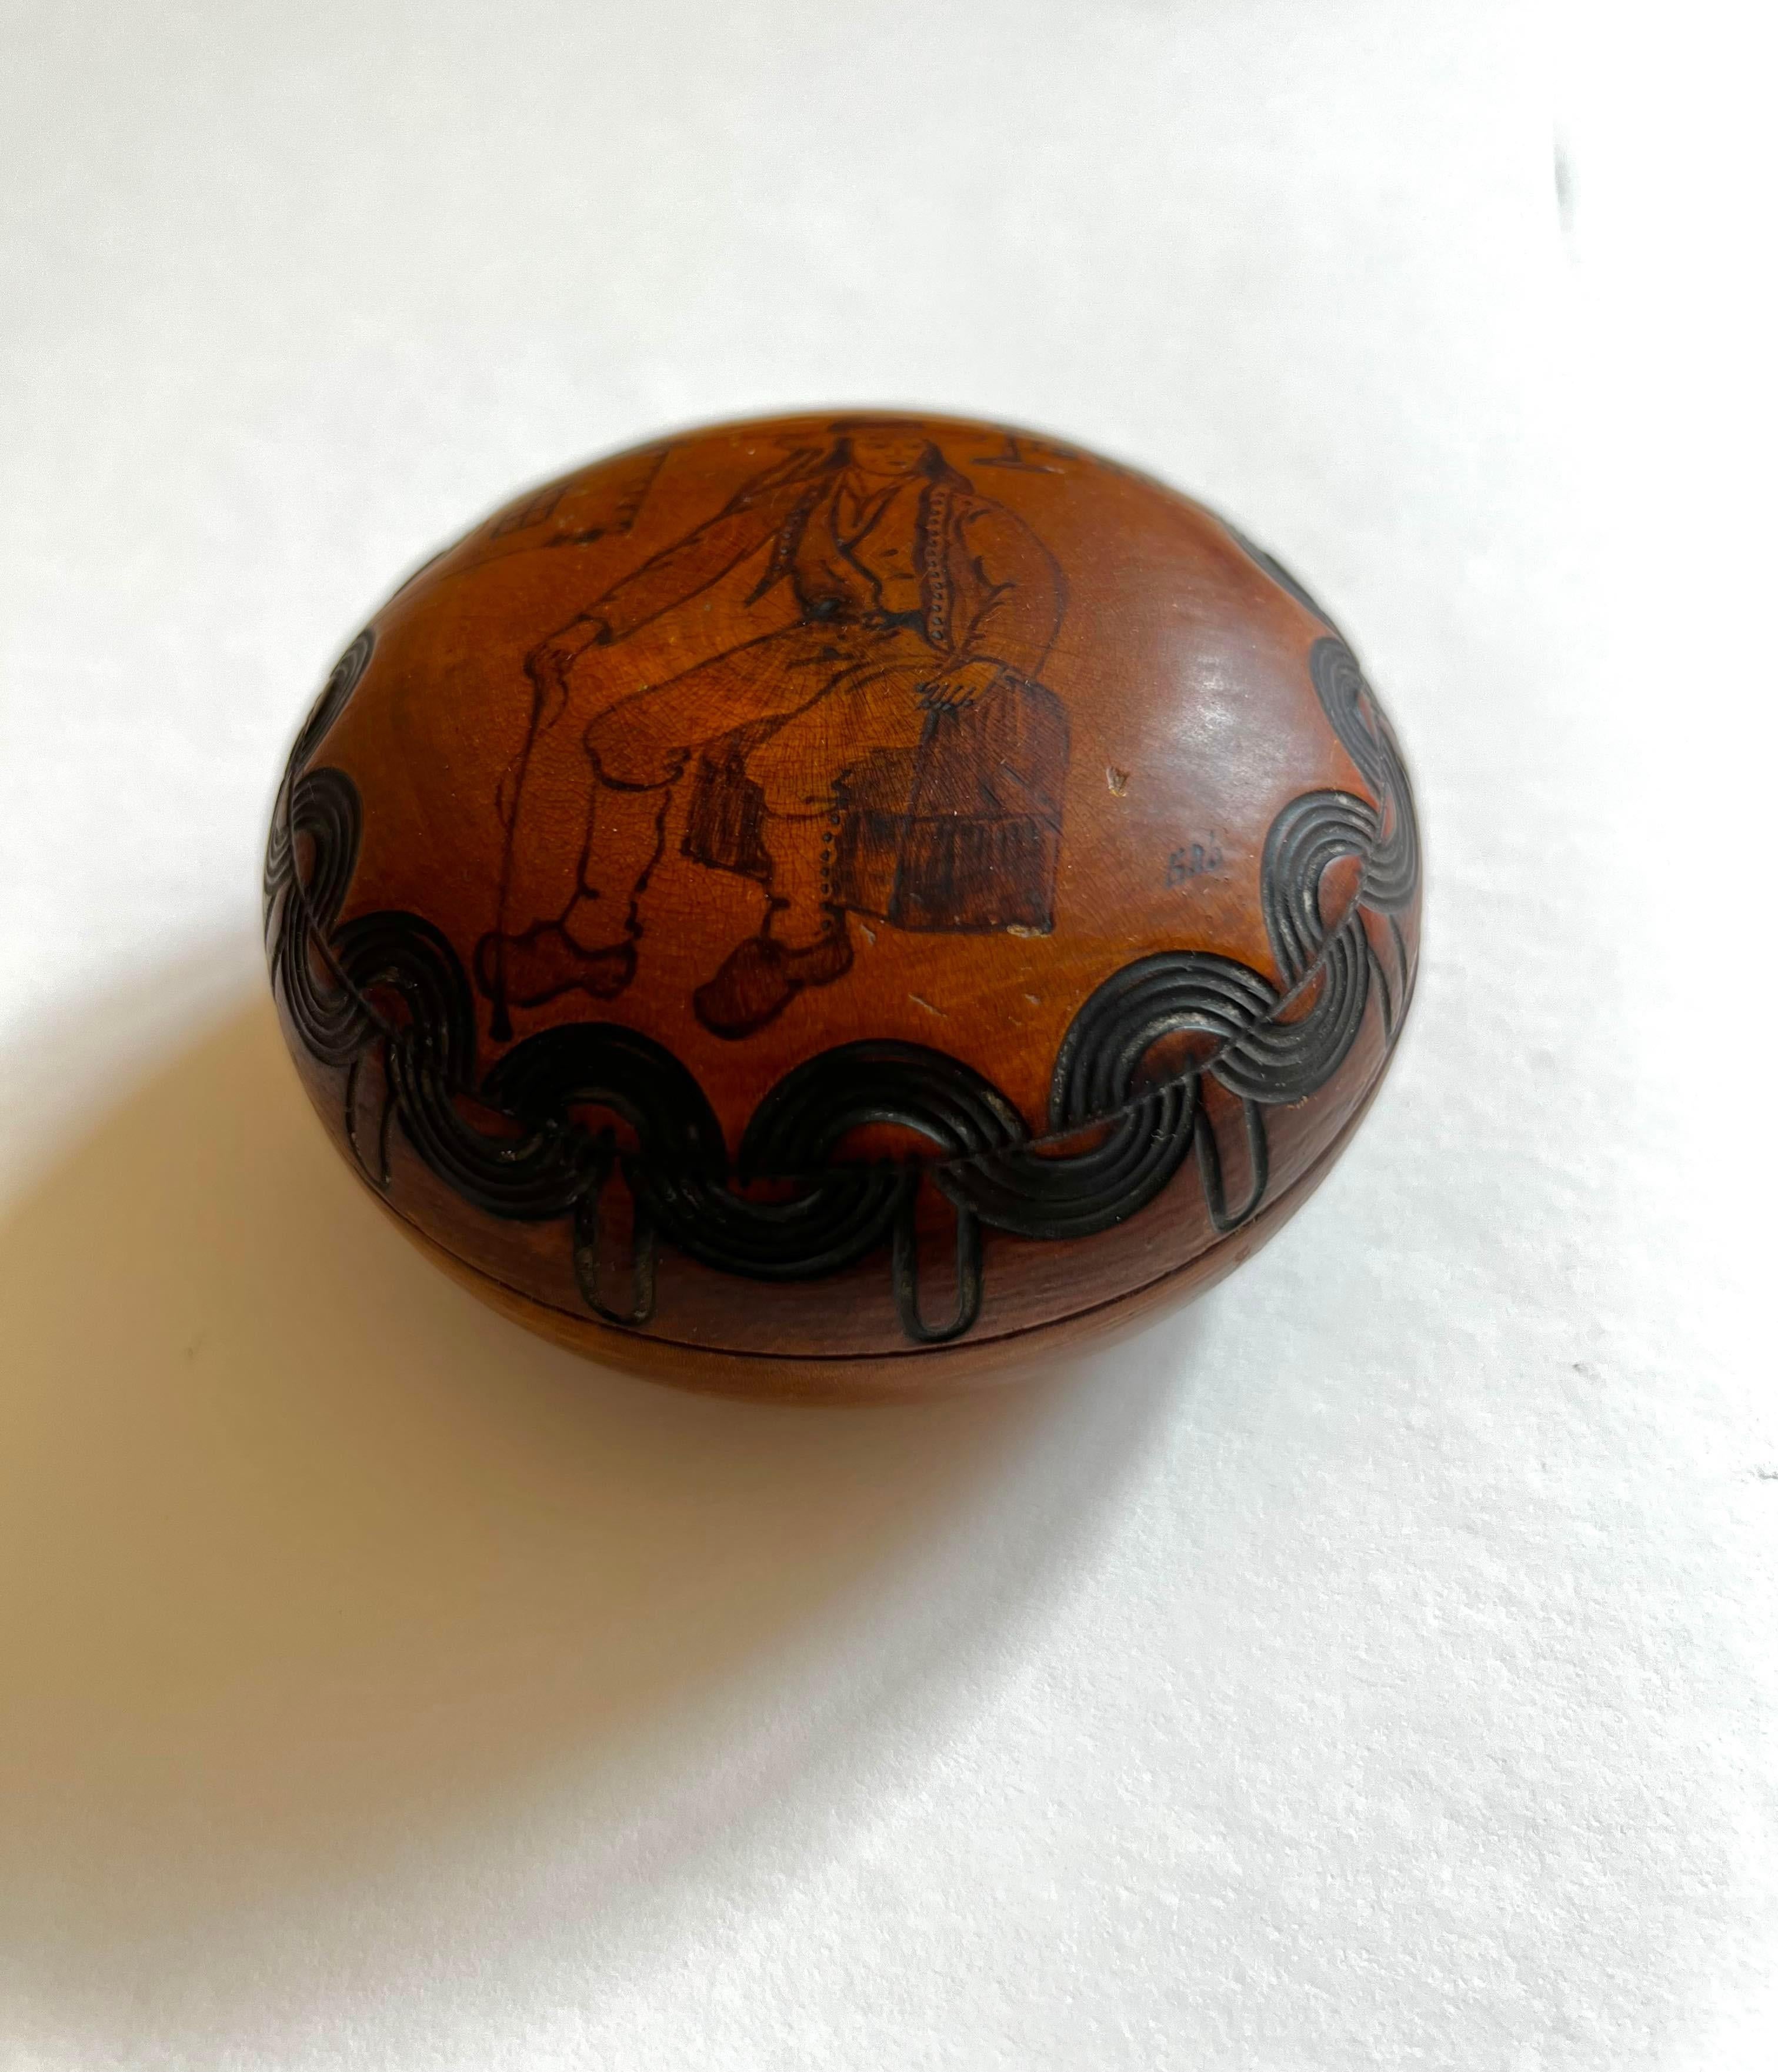 This honey colored wooden box depicts a breton figure in traditional clothing. Brittany is the northwesternmost region of France, heavily influenced by Celtic culture and was a part of the Roman Empire. This ovular spherical box is meticulously